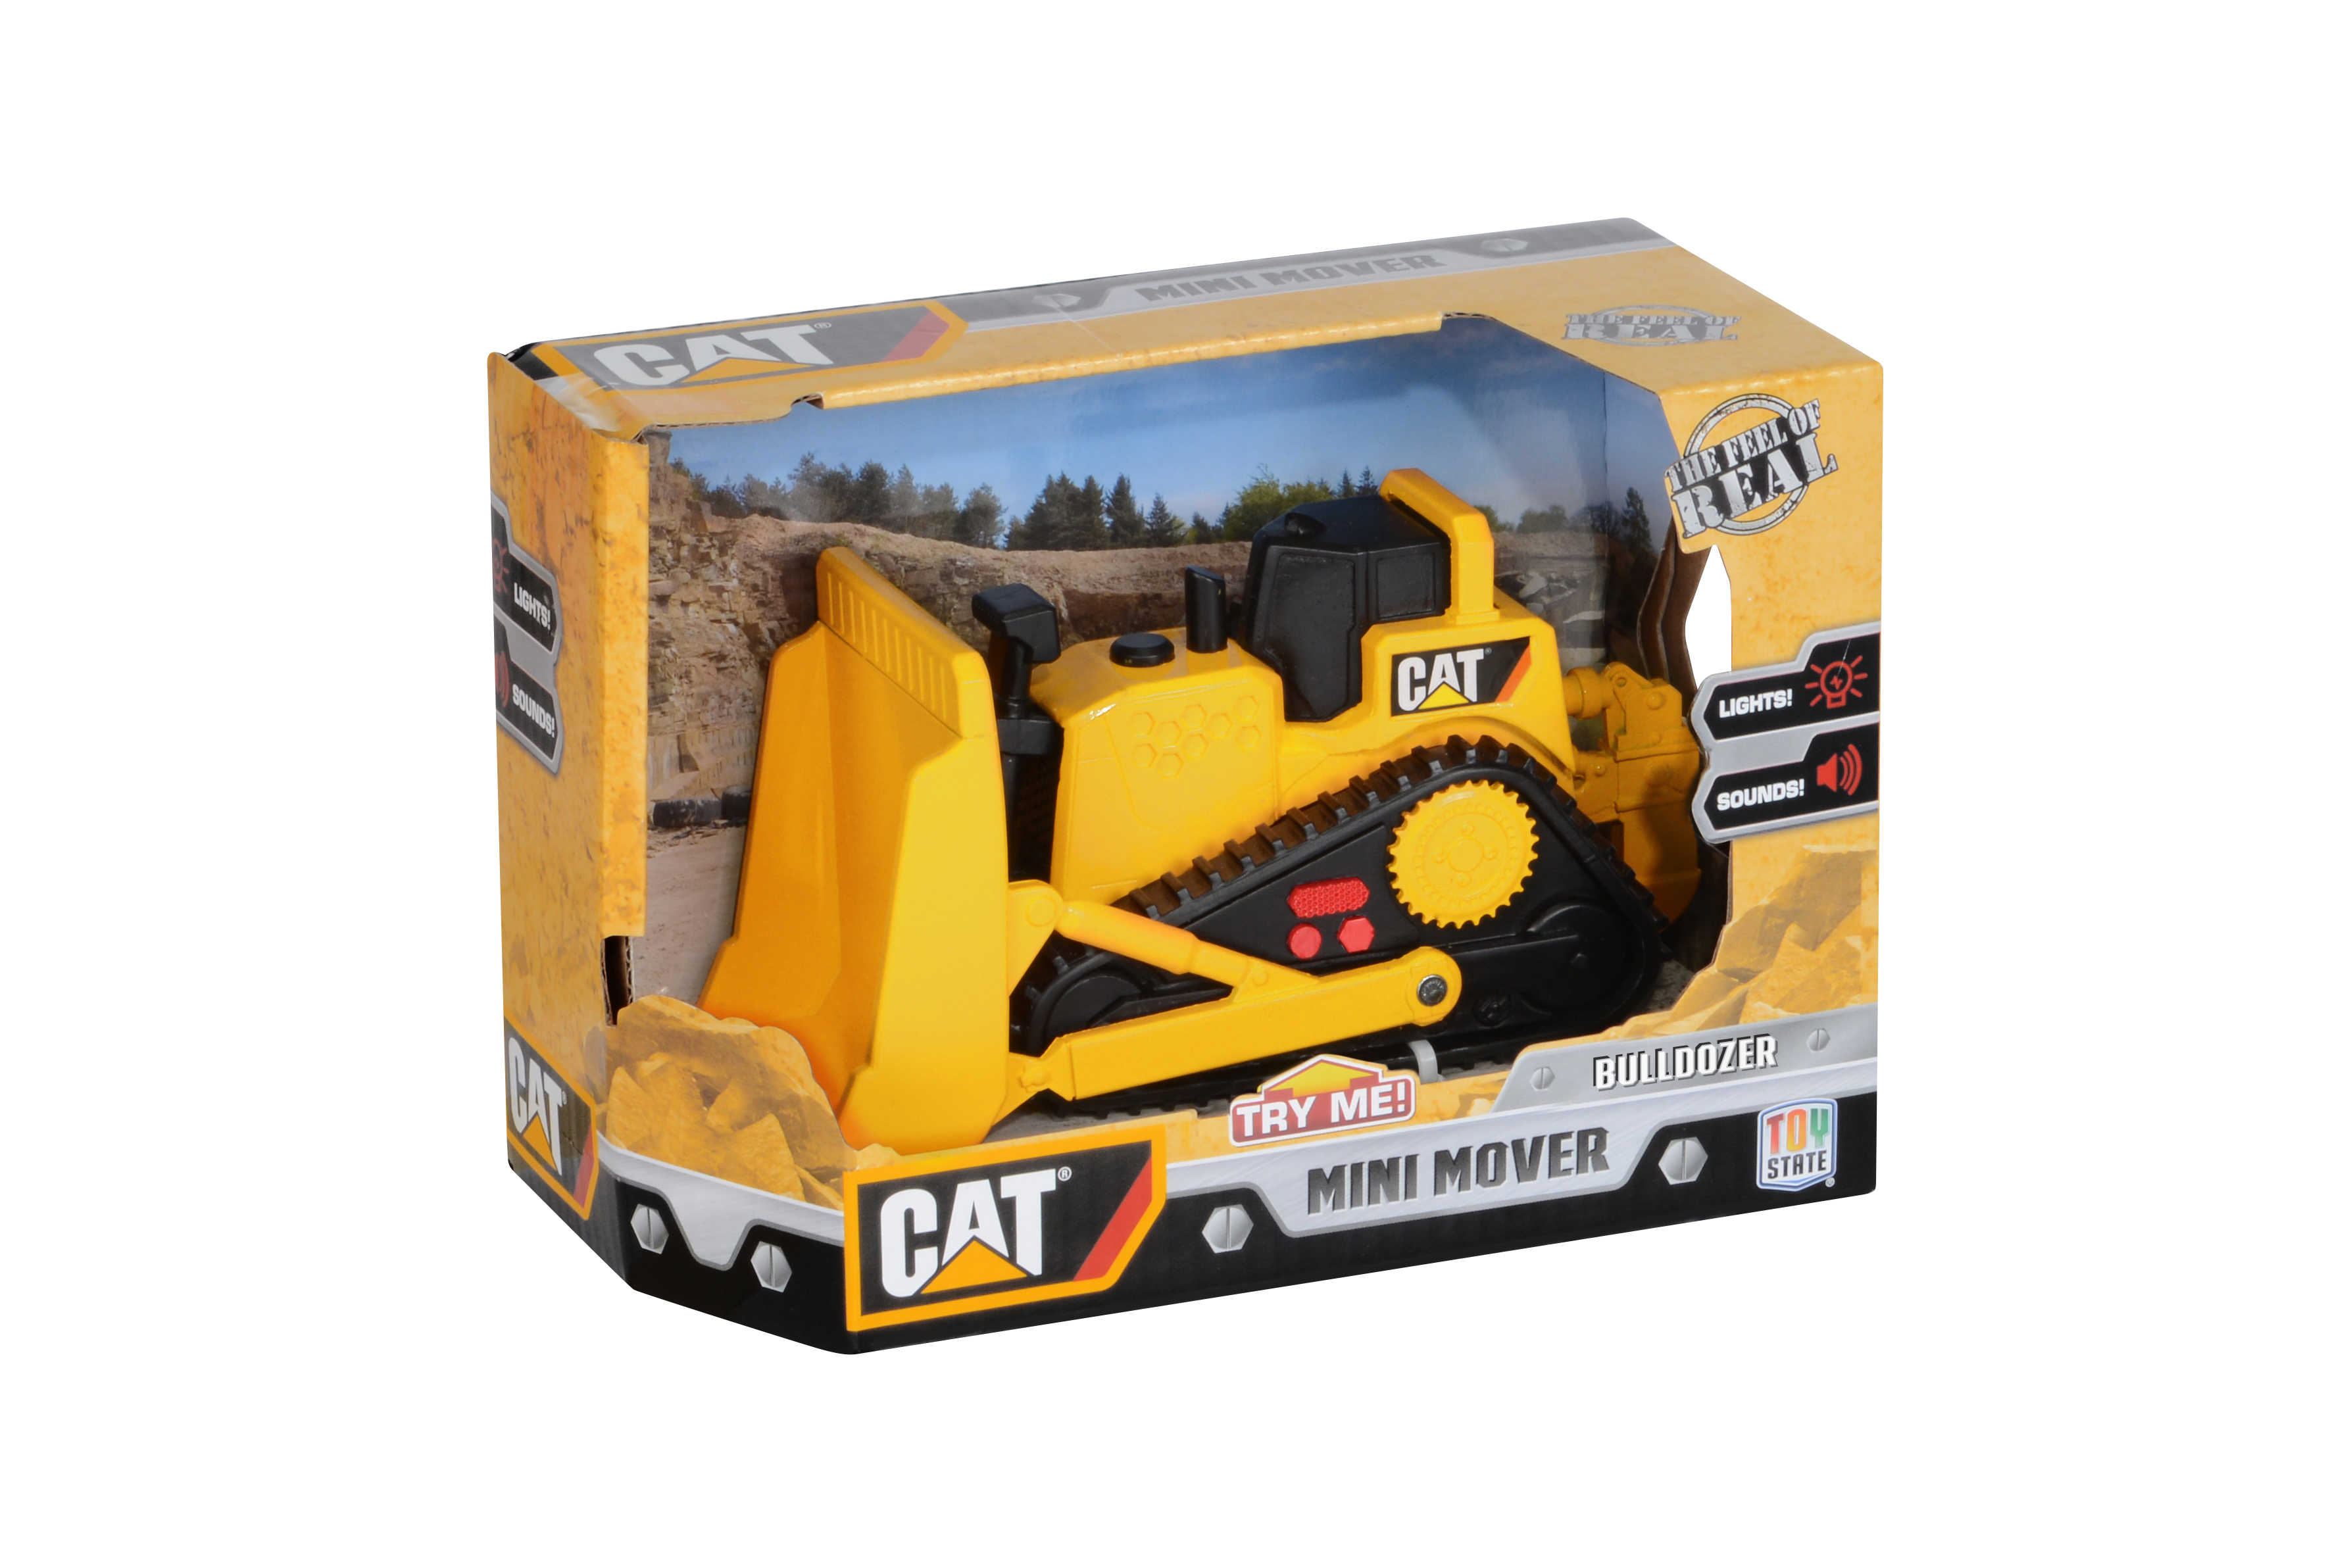 Cat Motorized Items CAT34613 Cat Mini Mover Bulldozer In Box with Lights & Sound - image 2 of 2